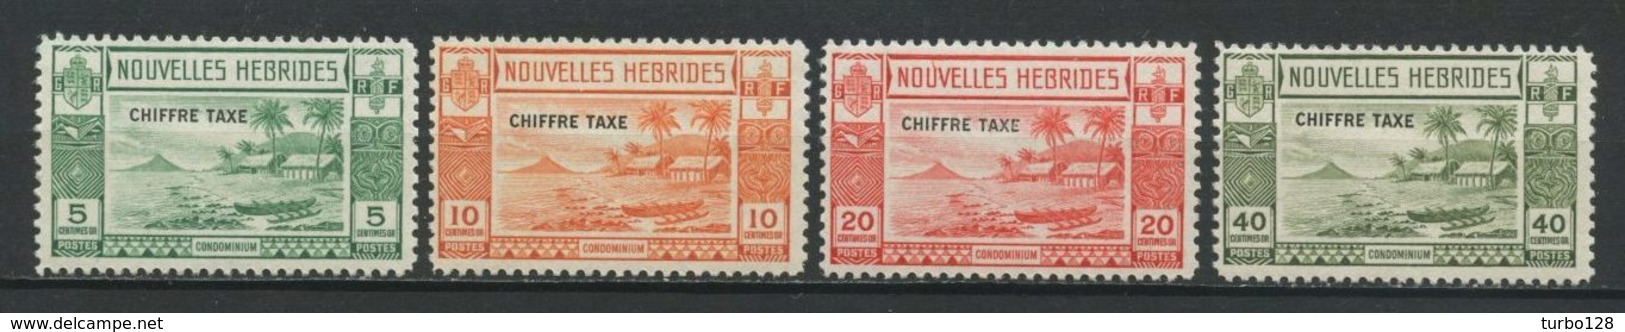 Nlle Hébrides 1938  Taxes N° 11/14 ** Neufs MNH Superbes C 61,60 € Paysage Bateau Pirogue Transports - Timbres-taxe